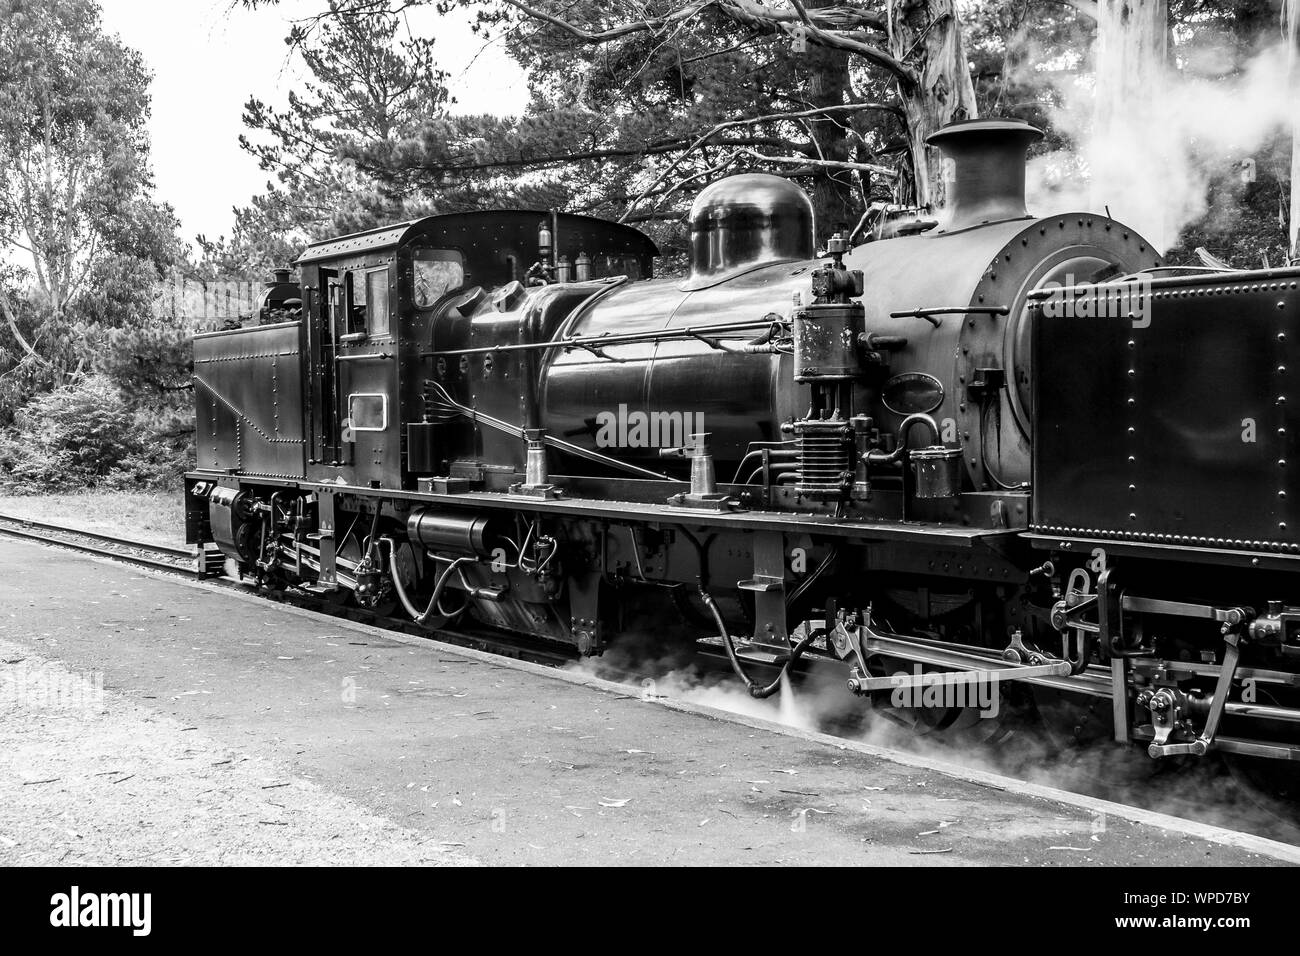 Melbourne, Australia - January 7, 2009: Puffing Billy steam train. Historical narrow railway in the Dandenong Ranges near Melbourne. Stock Photo